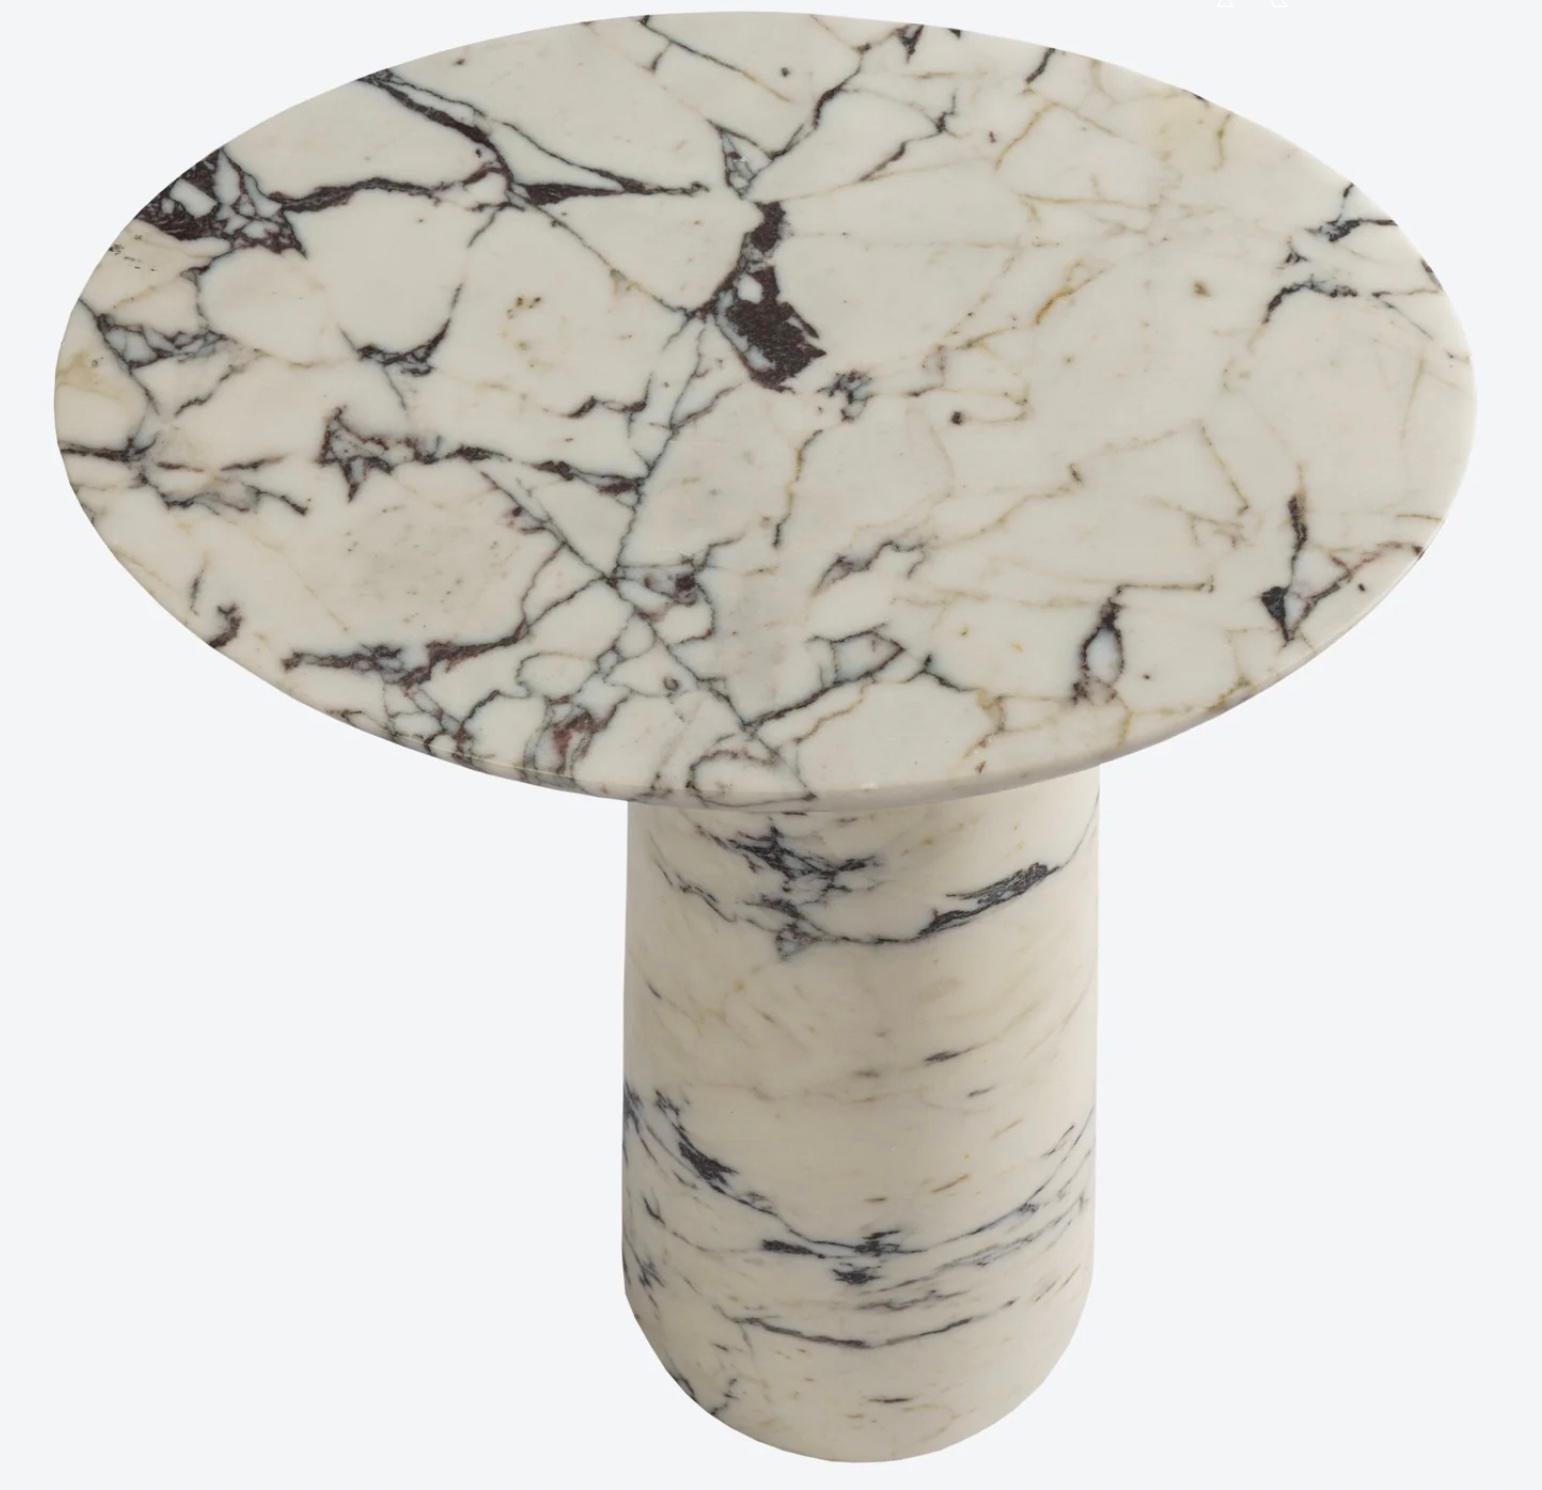 Our Athena table is comprised of crescent shaped table top elegantly perched on a conical pedestal. Deliberately asymmetrical. Carved from small blocks of Calacatta Viola marble. Due to the nature of the stone, each piece may vary.

Handmade in